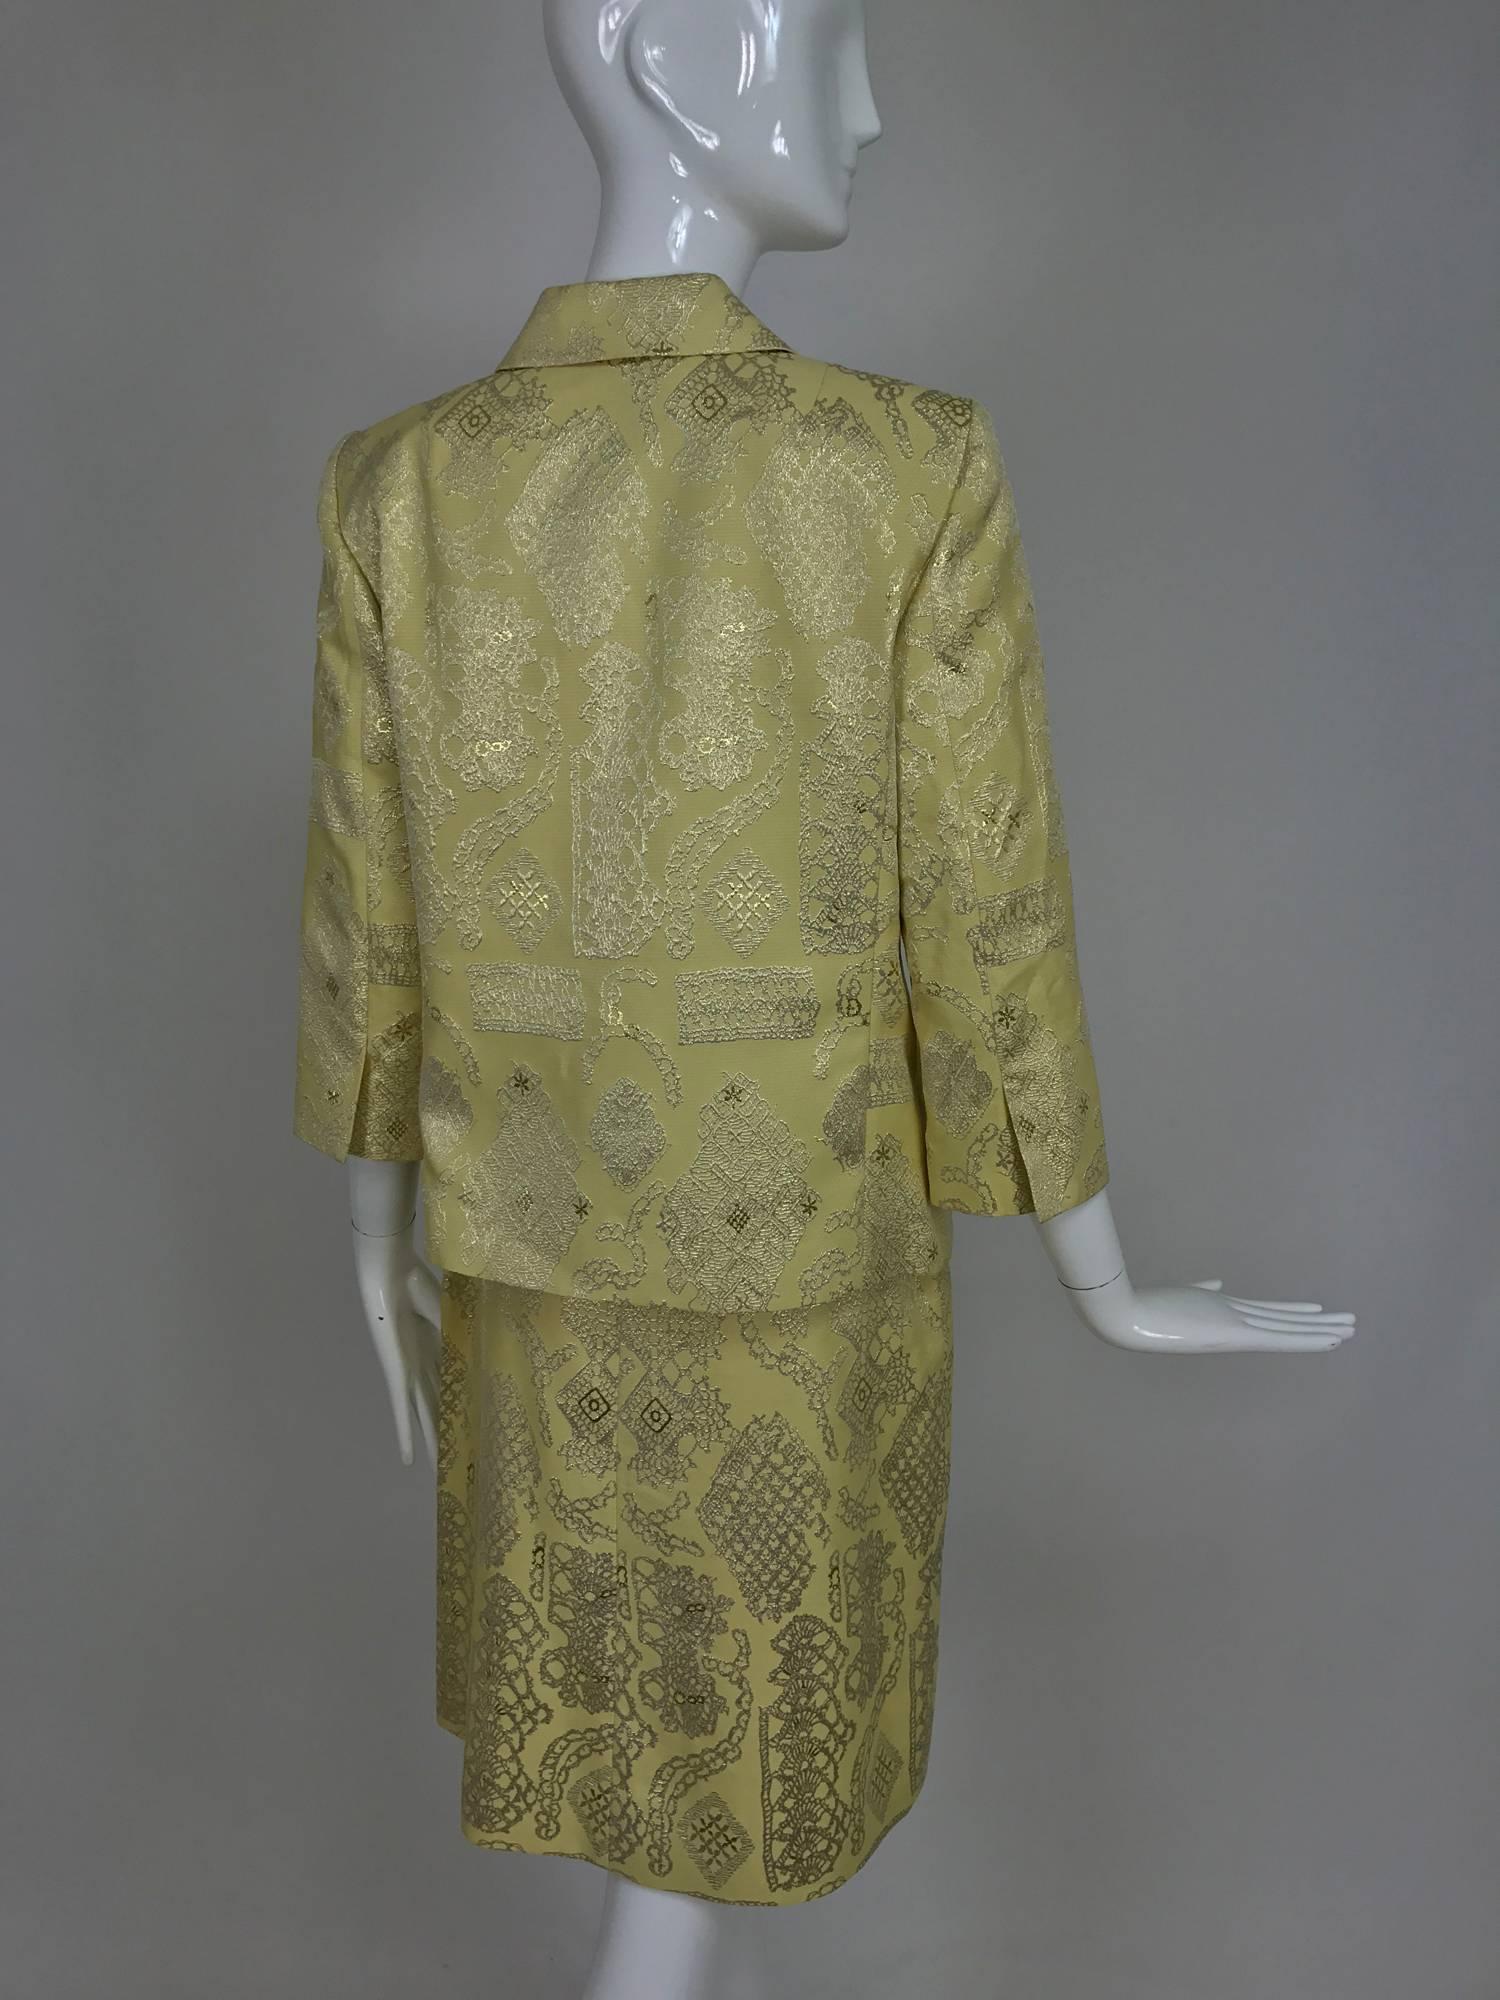 Vintage Christian LaCroix 2pc metallic brocade jacket and skirt 1980s In Excellent Condition For Sale In West Palm Beach, FL